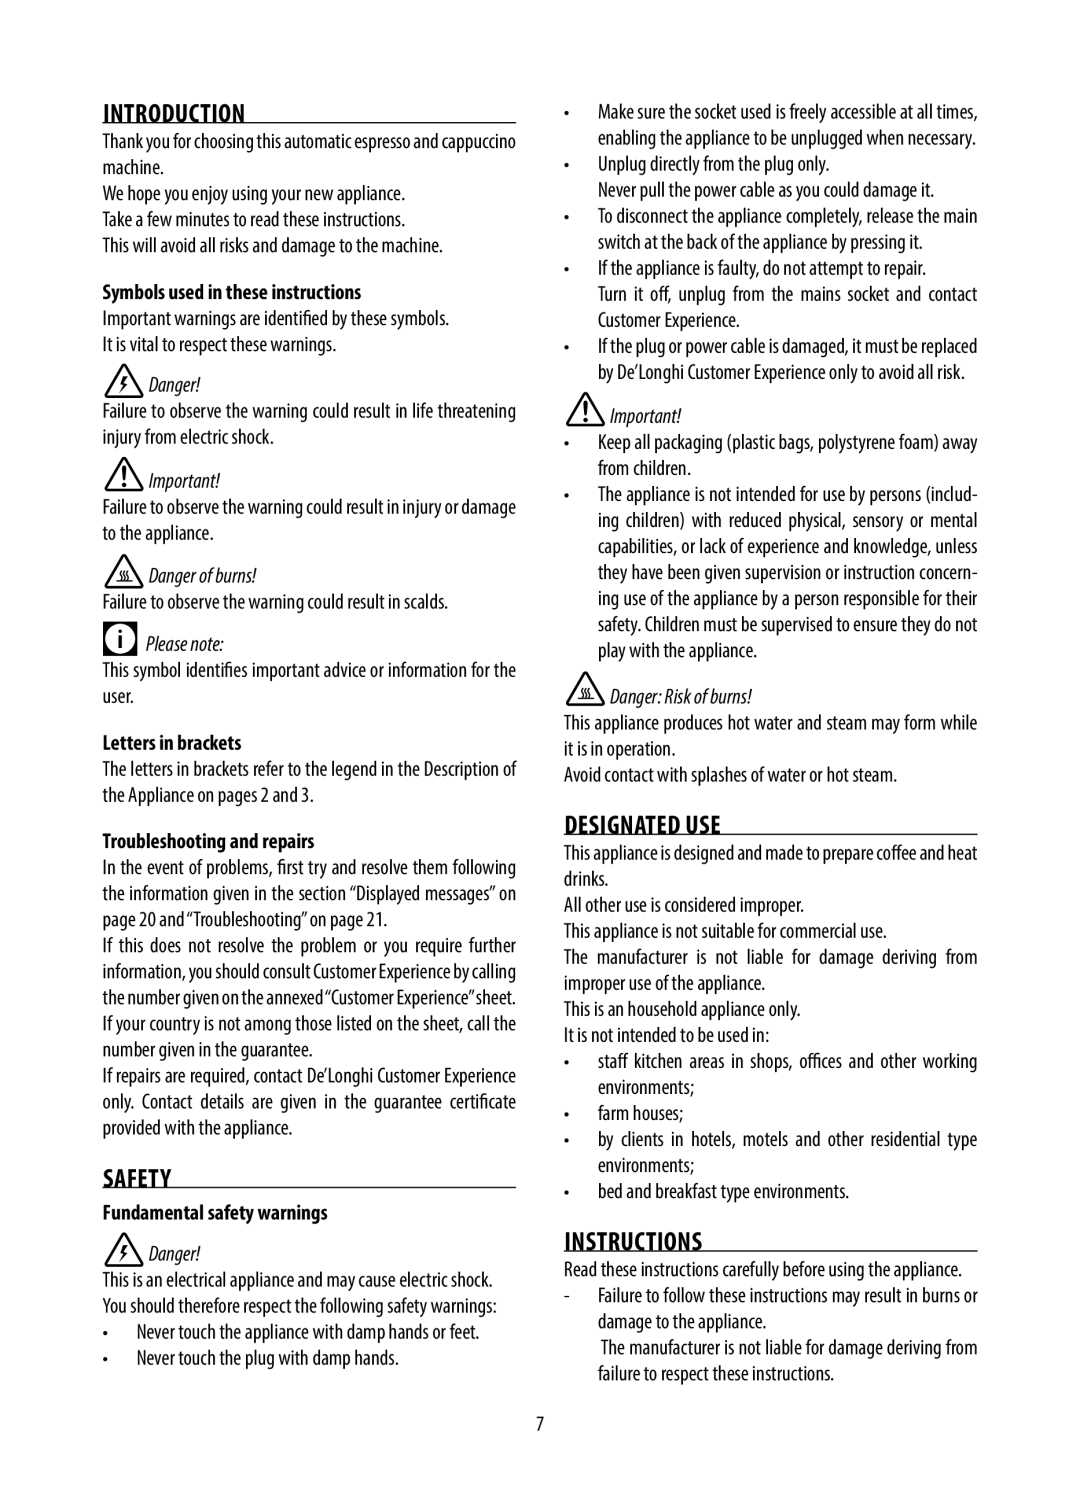 DeLonghi GB Introduction, Safety, Designated Use, Instructions, Symbols used in these instructions, Danger, Please note 